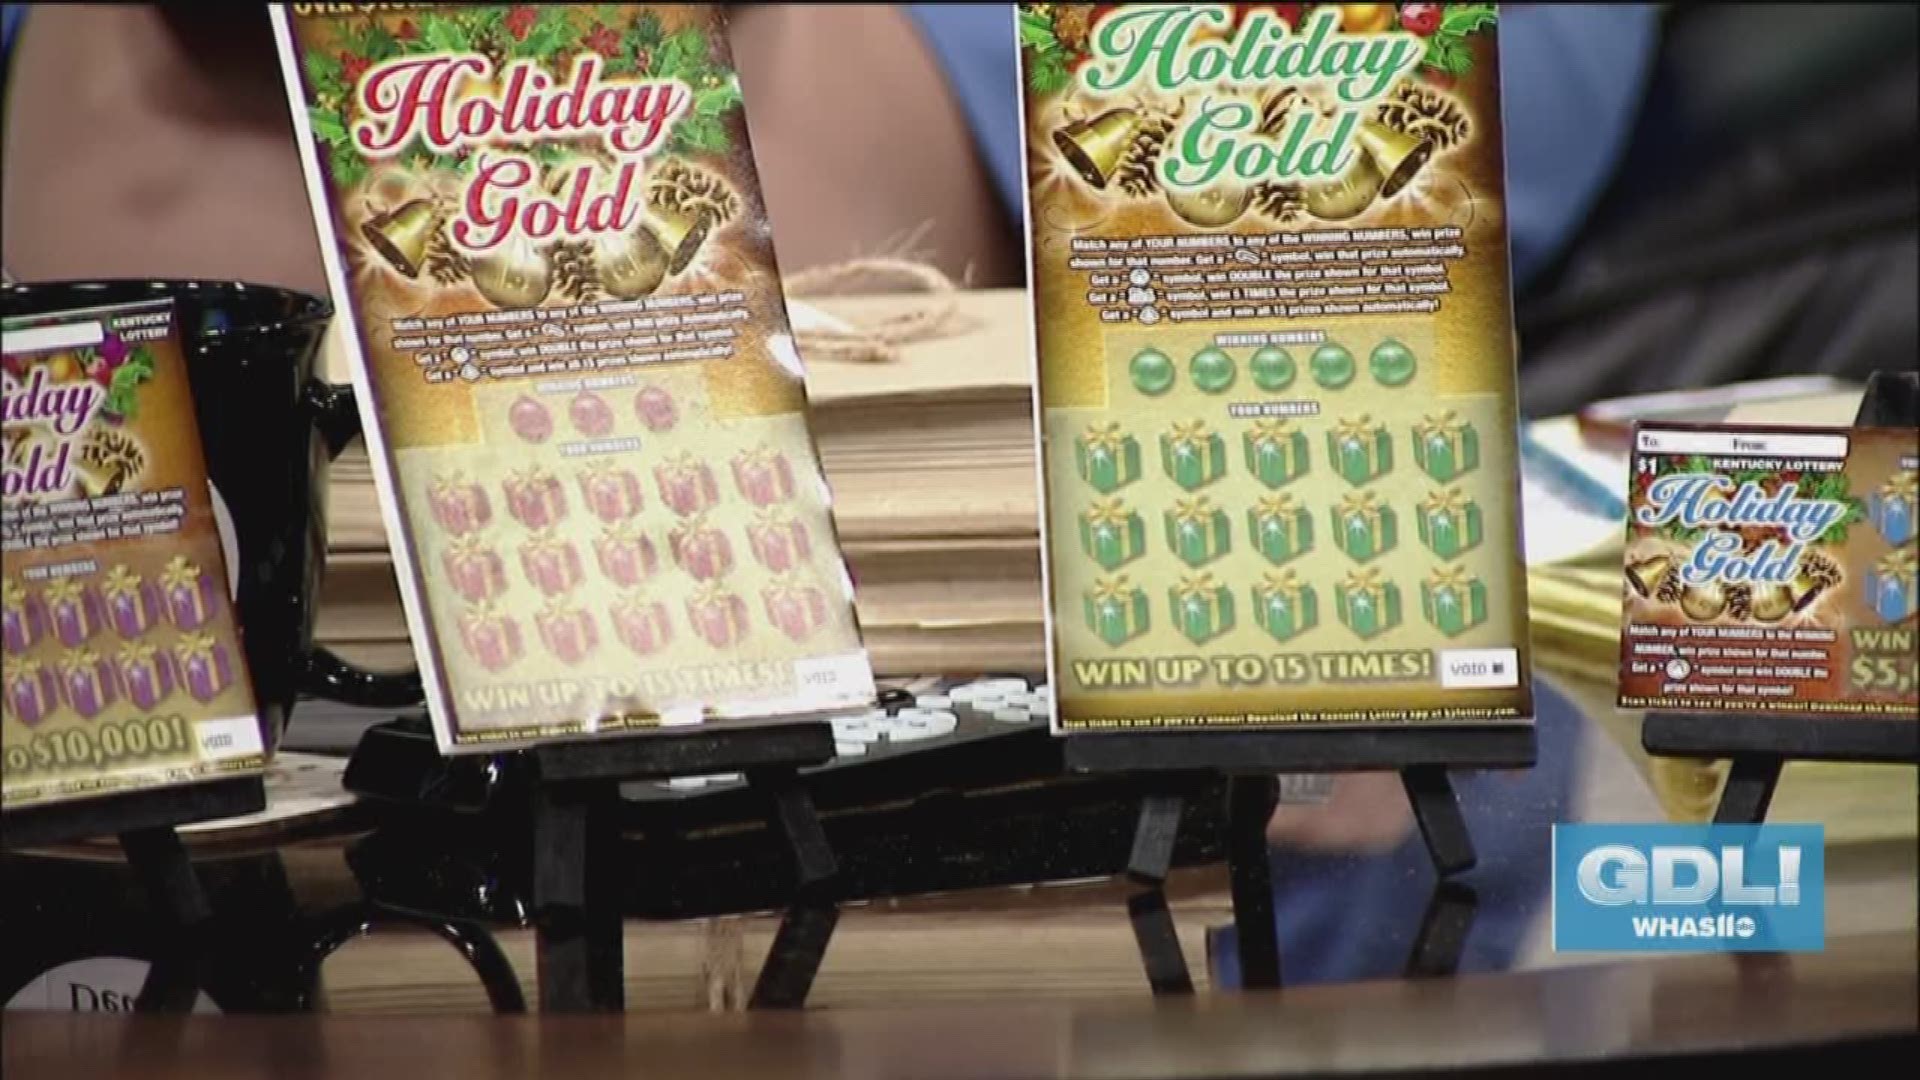 Lottery tickets can be a fun gift that could potentially keep on giving if someone hits the jackpot! For more information, go to KYLottery.com.